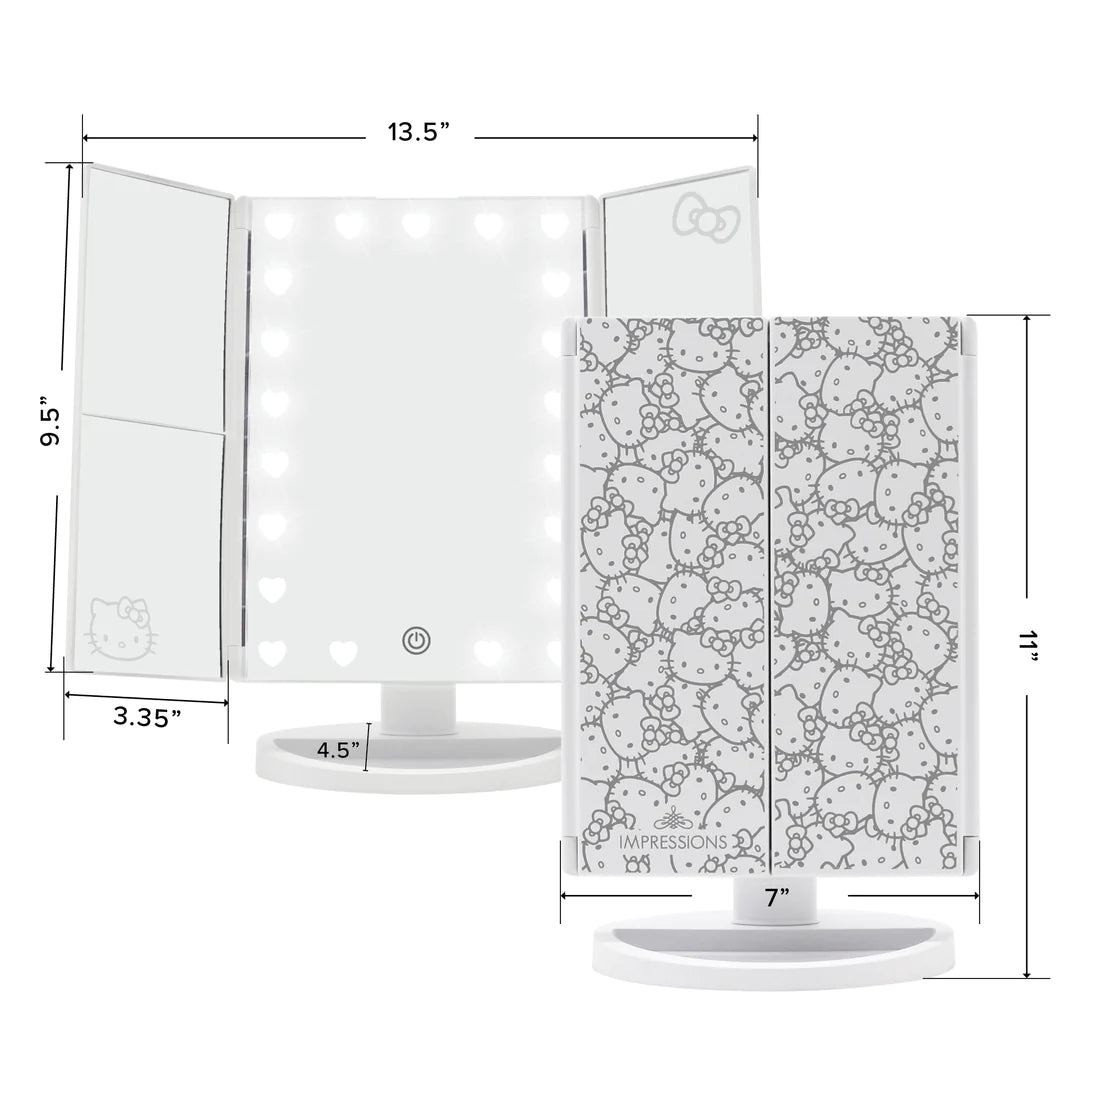 Impressions Vanity - Hello Kitty Trifold LED Makeup Mirror with Magnification White